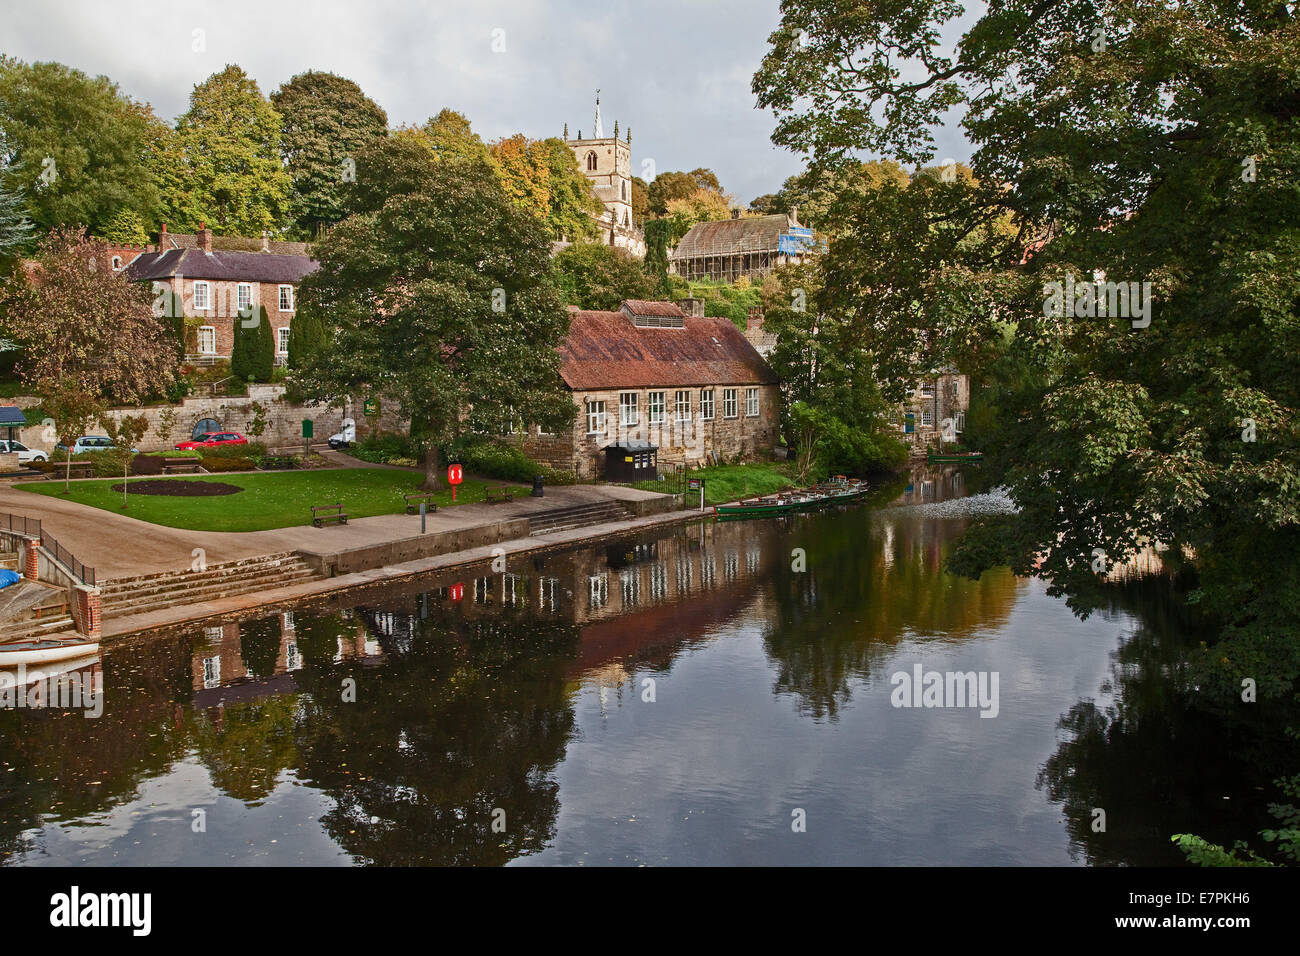 Knaresborough, where the river Nidd ,flows through the town as it winds its way through Nidderdale,and into the sea. Stock Photo